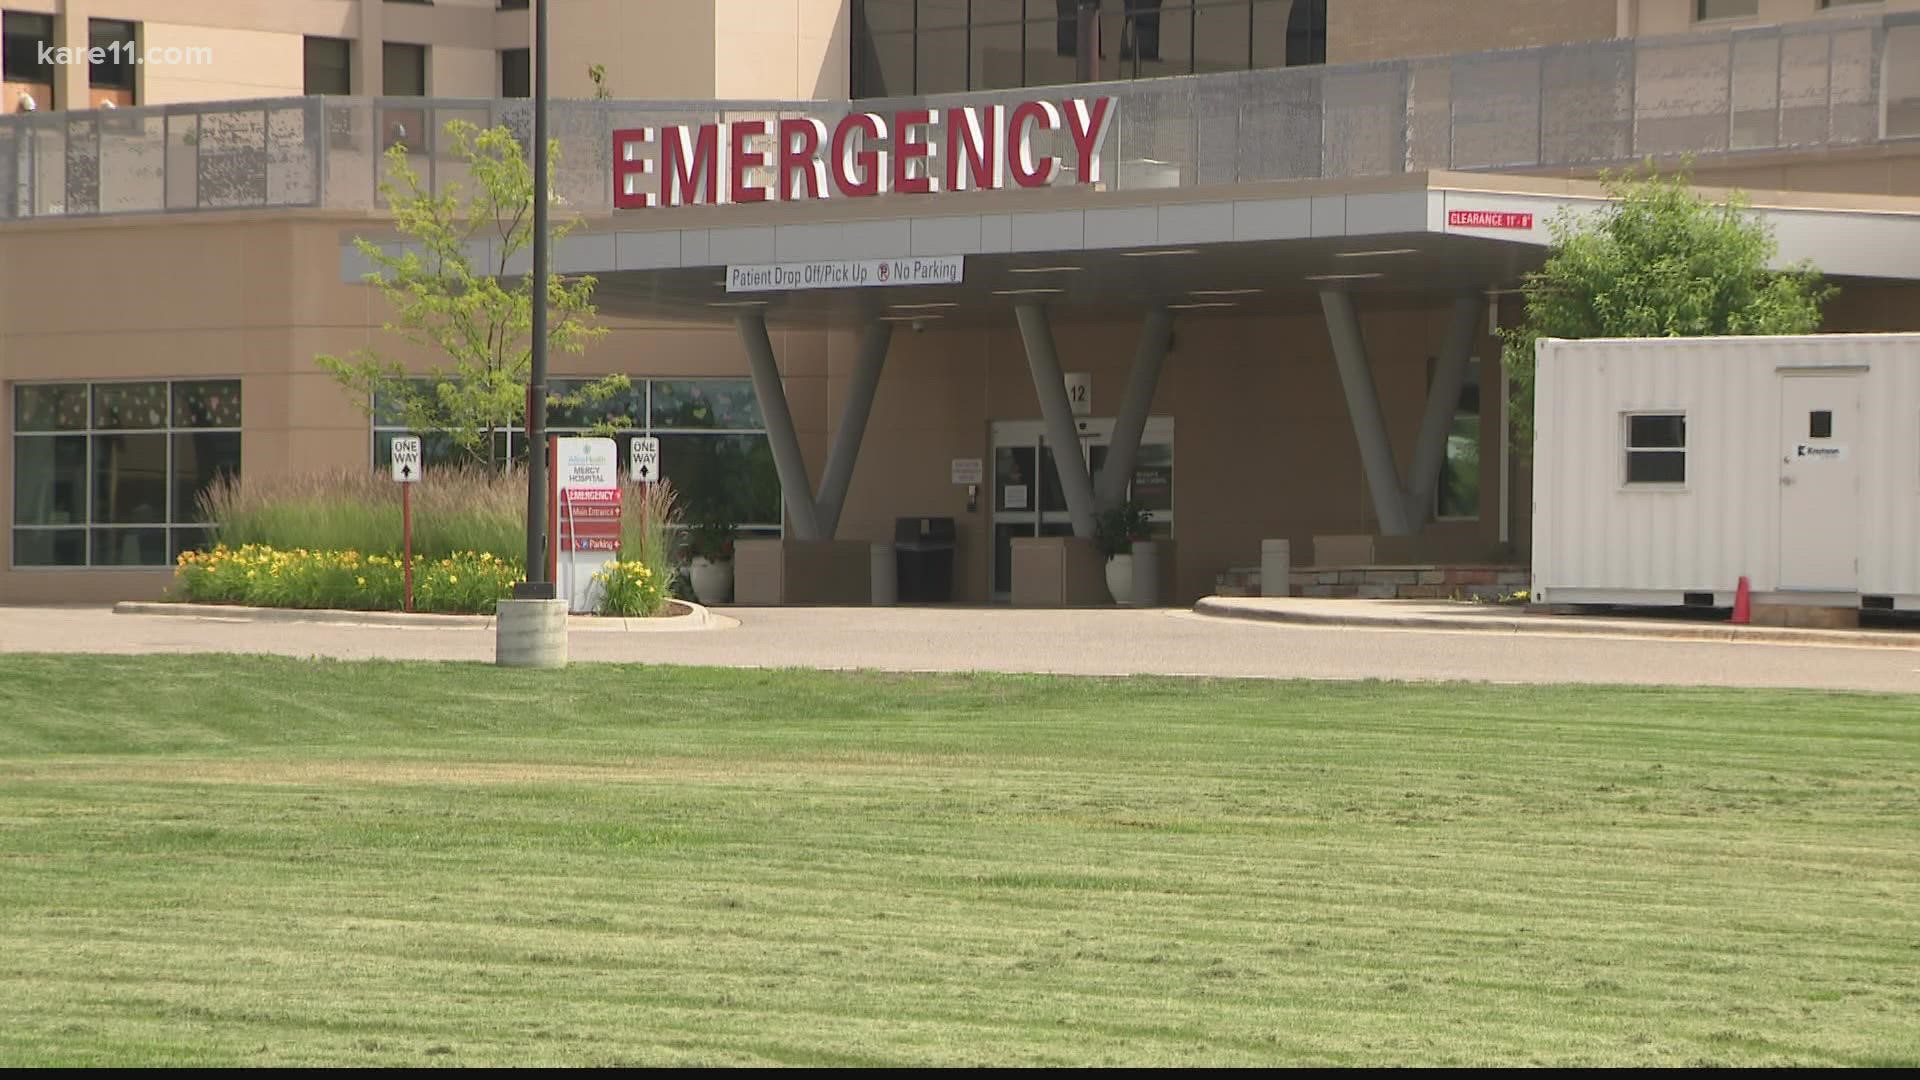 According to court documents, a temporary restraining order bars Mercy Hospital from removing patient Scott Quiner from a ventilator.